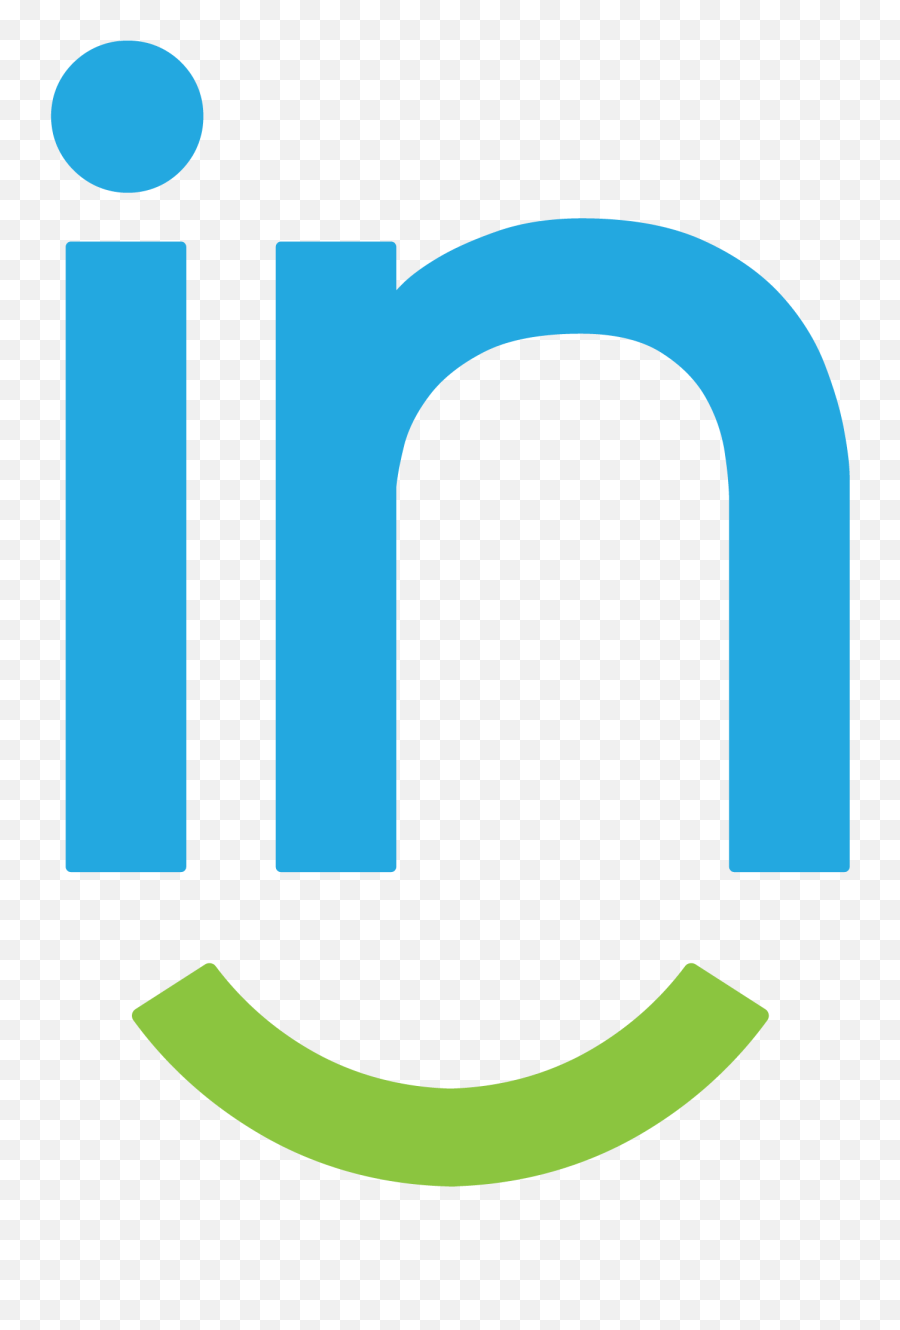 Download Hd Refresh Icon Png Transparent Image - Nicepngcom Linkedin,Refresh Icon Png